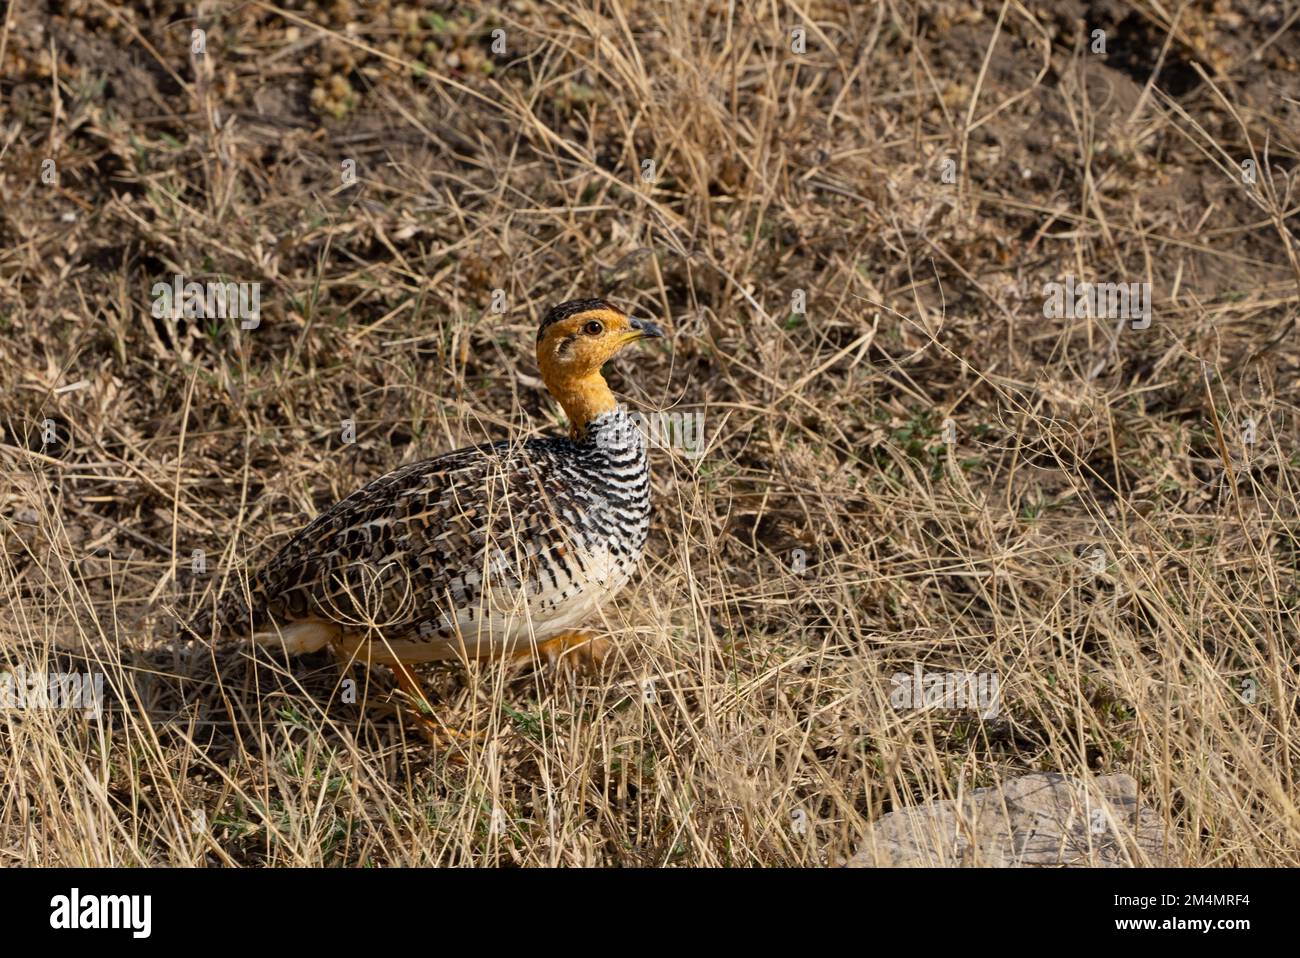 Male Coqui francolin (Campocolinus coqui) is a species of bird in the family Phasianidae. Photographed in Tanzania Stock Photo